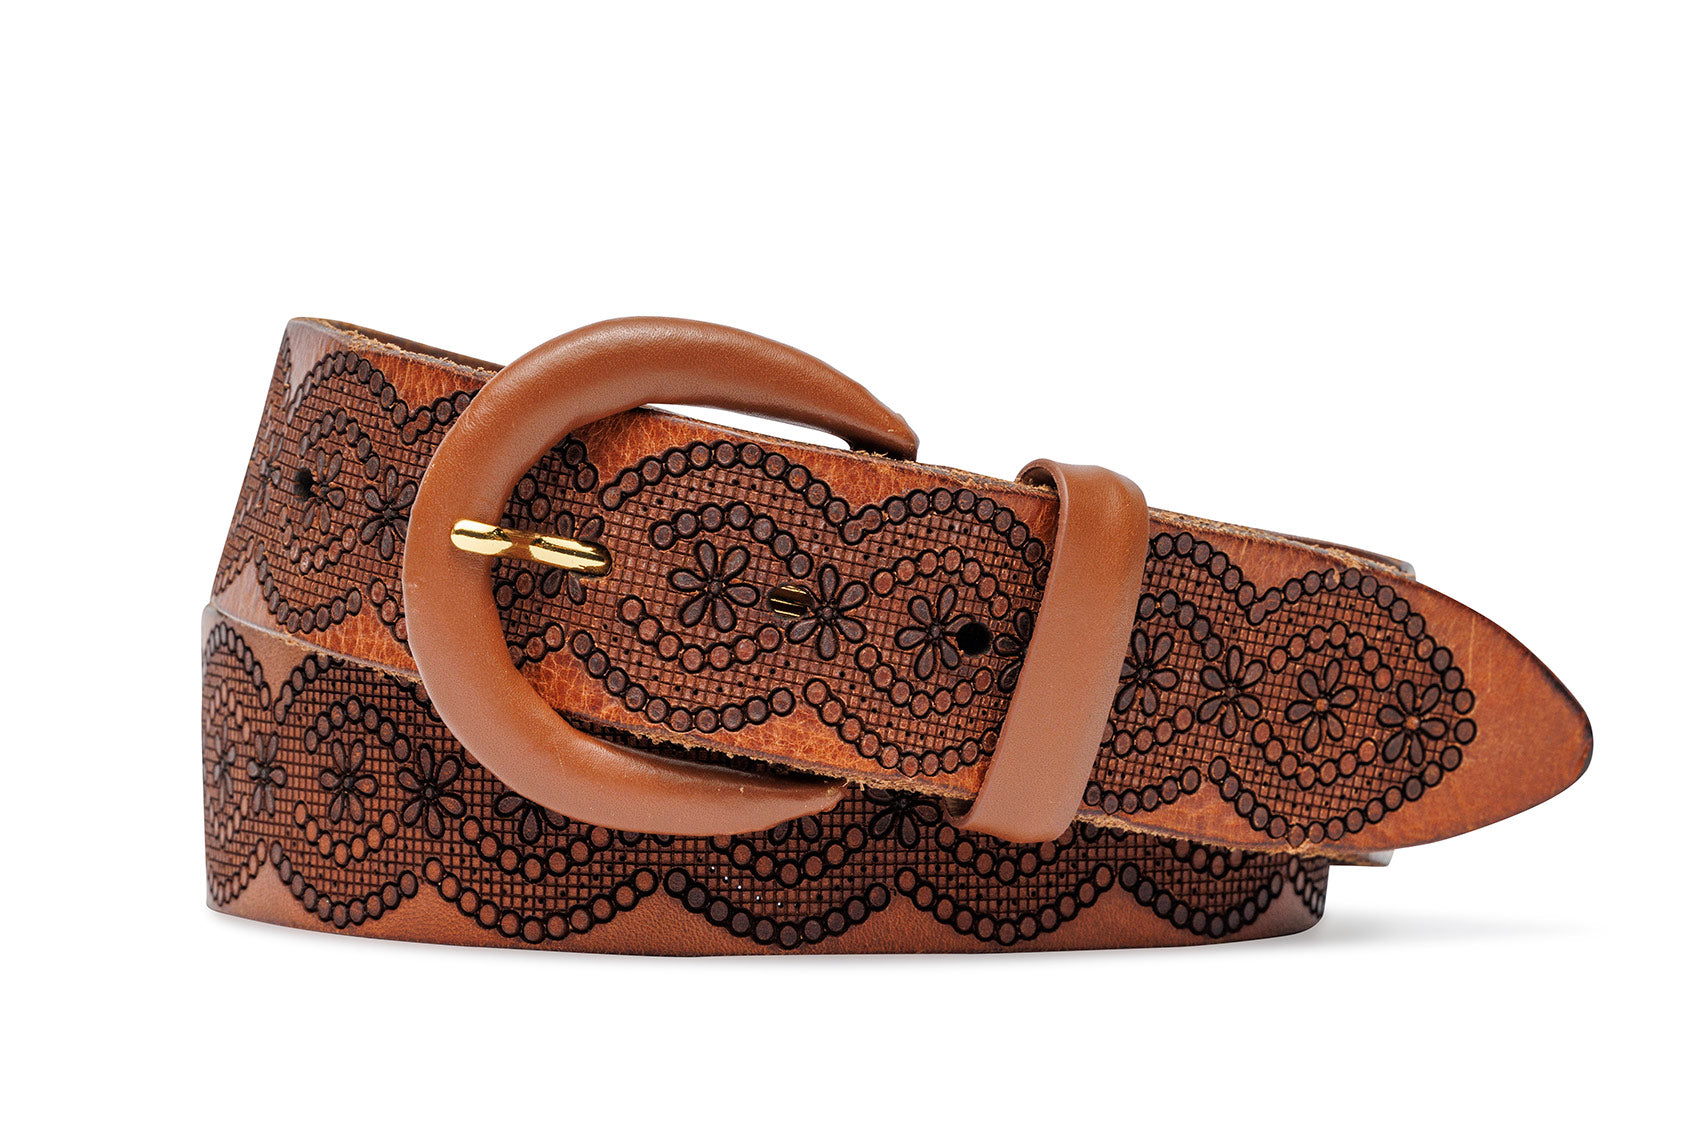 Italian Floral Calf Belt with Covered Buckle